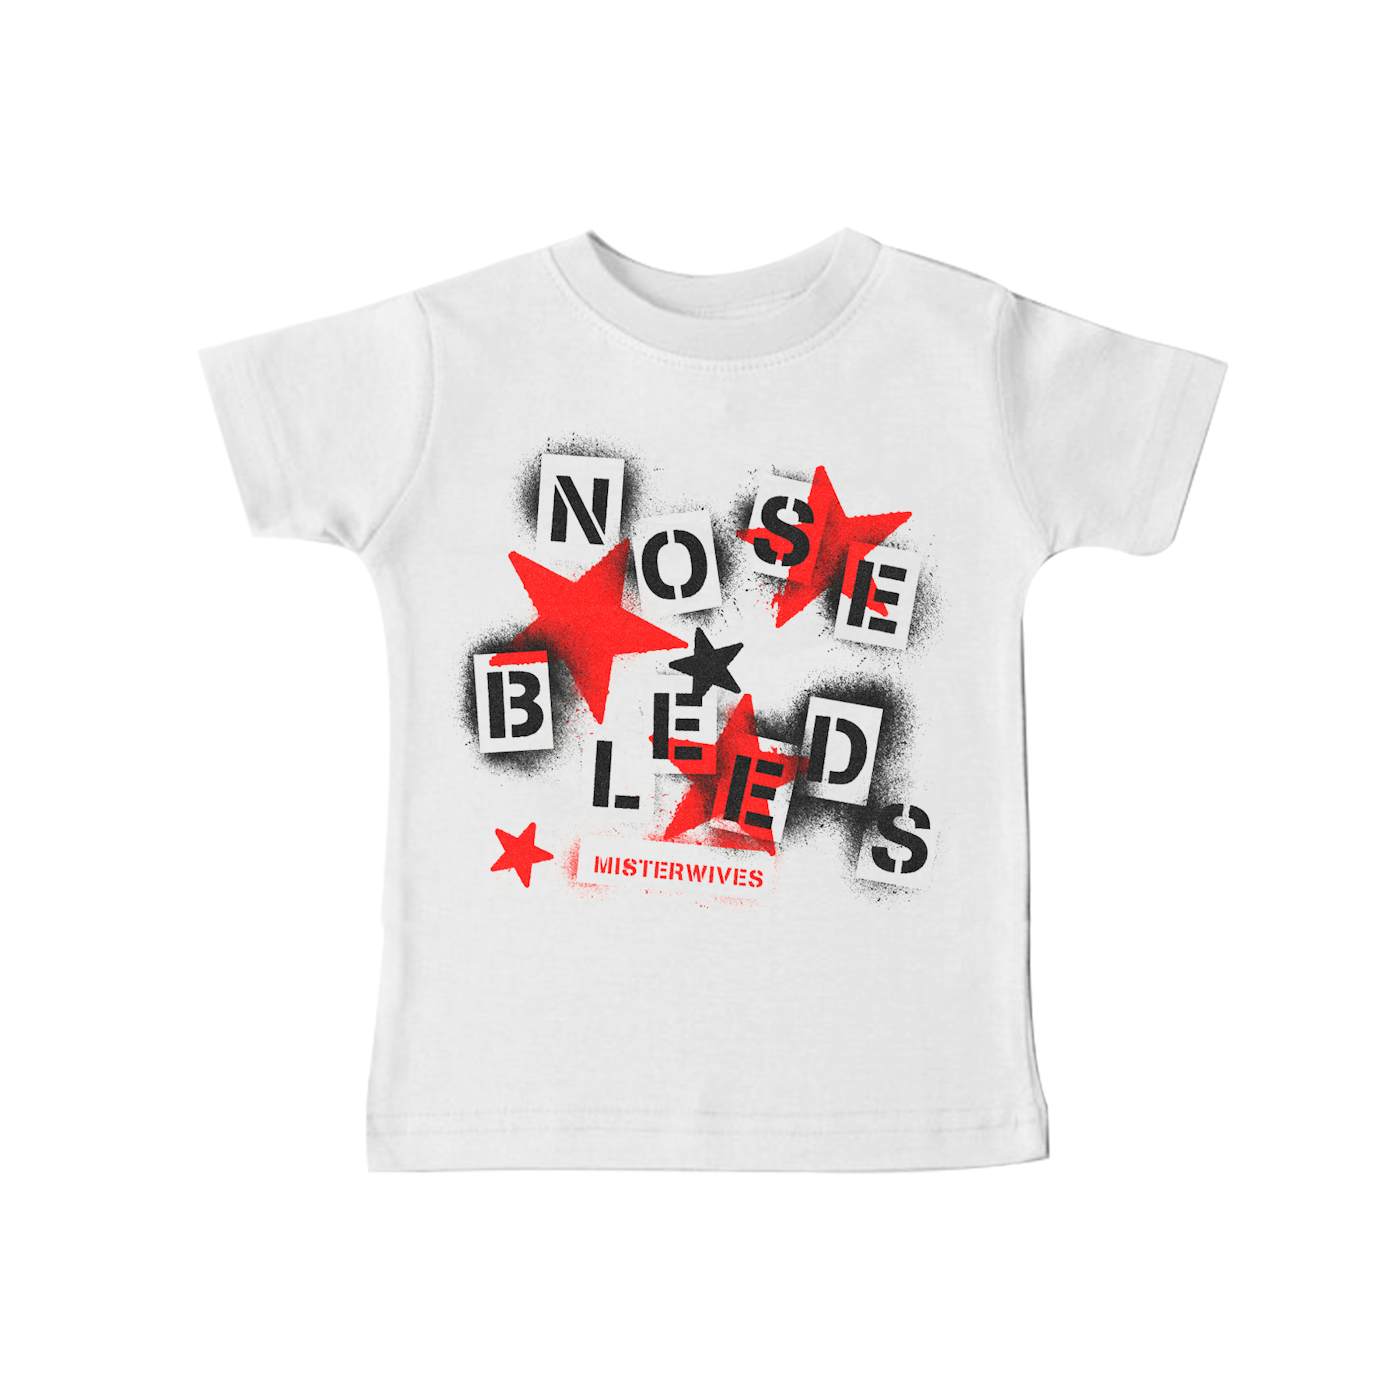 MisterWives Spray Paint White Baby Tee